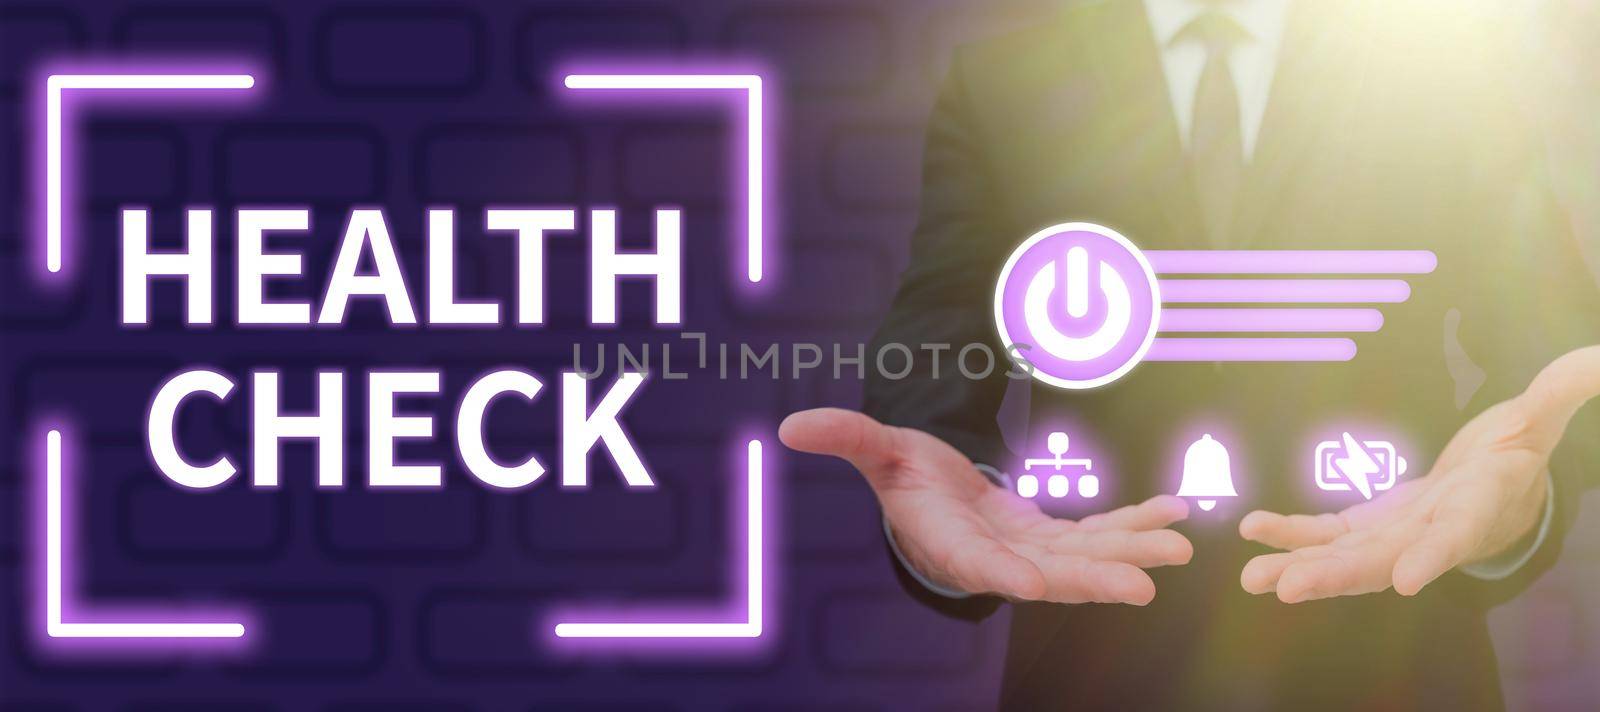 Conceptual caption Health Check, Concept meaning Medical Examination Diagnosis Tests to prevent diseases